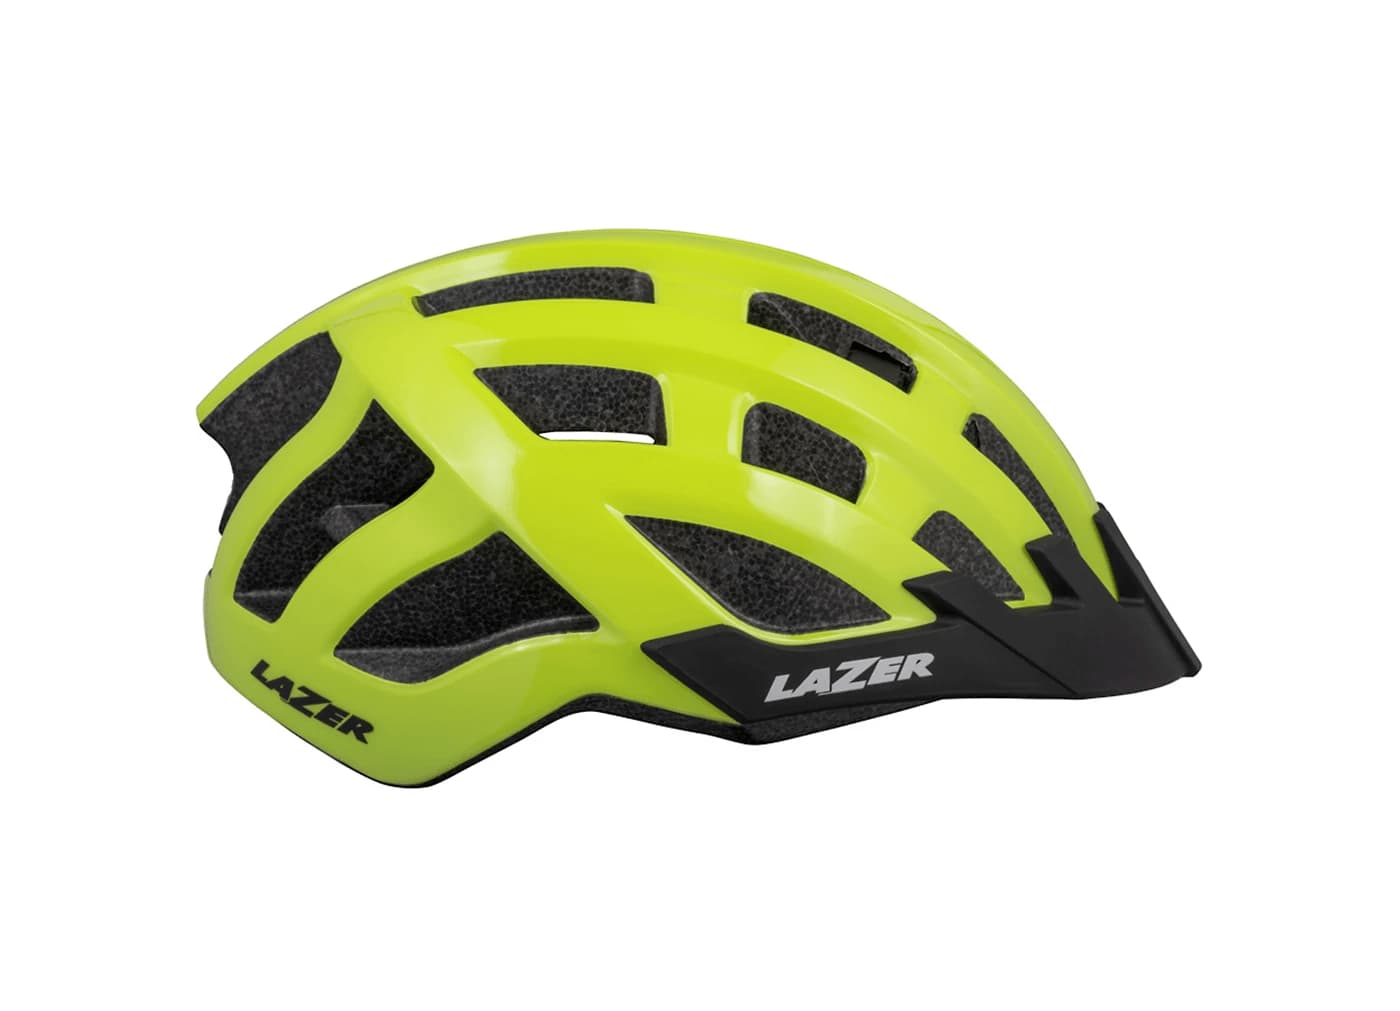 Lazer Compact DLX helmet with LED yellow